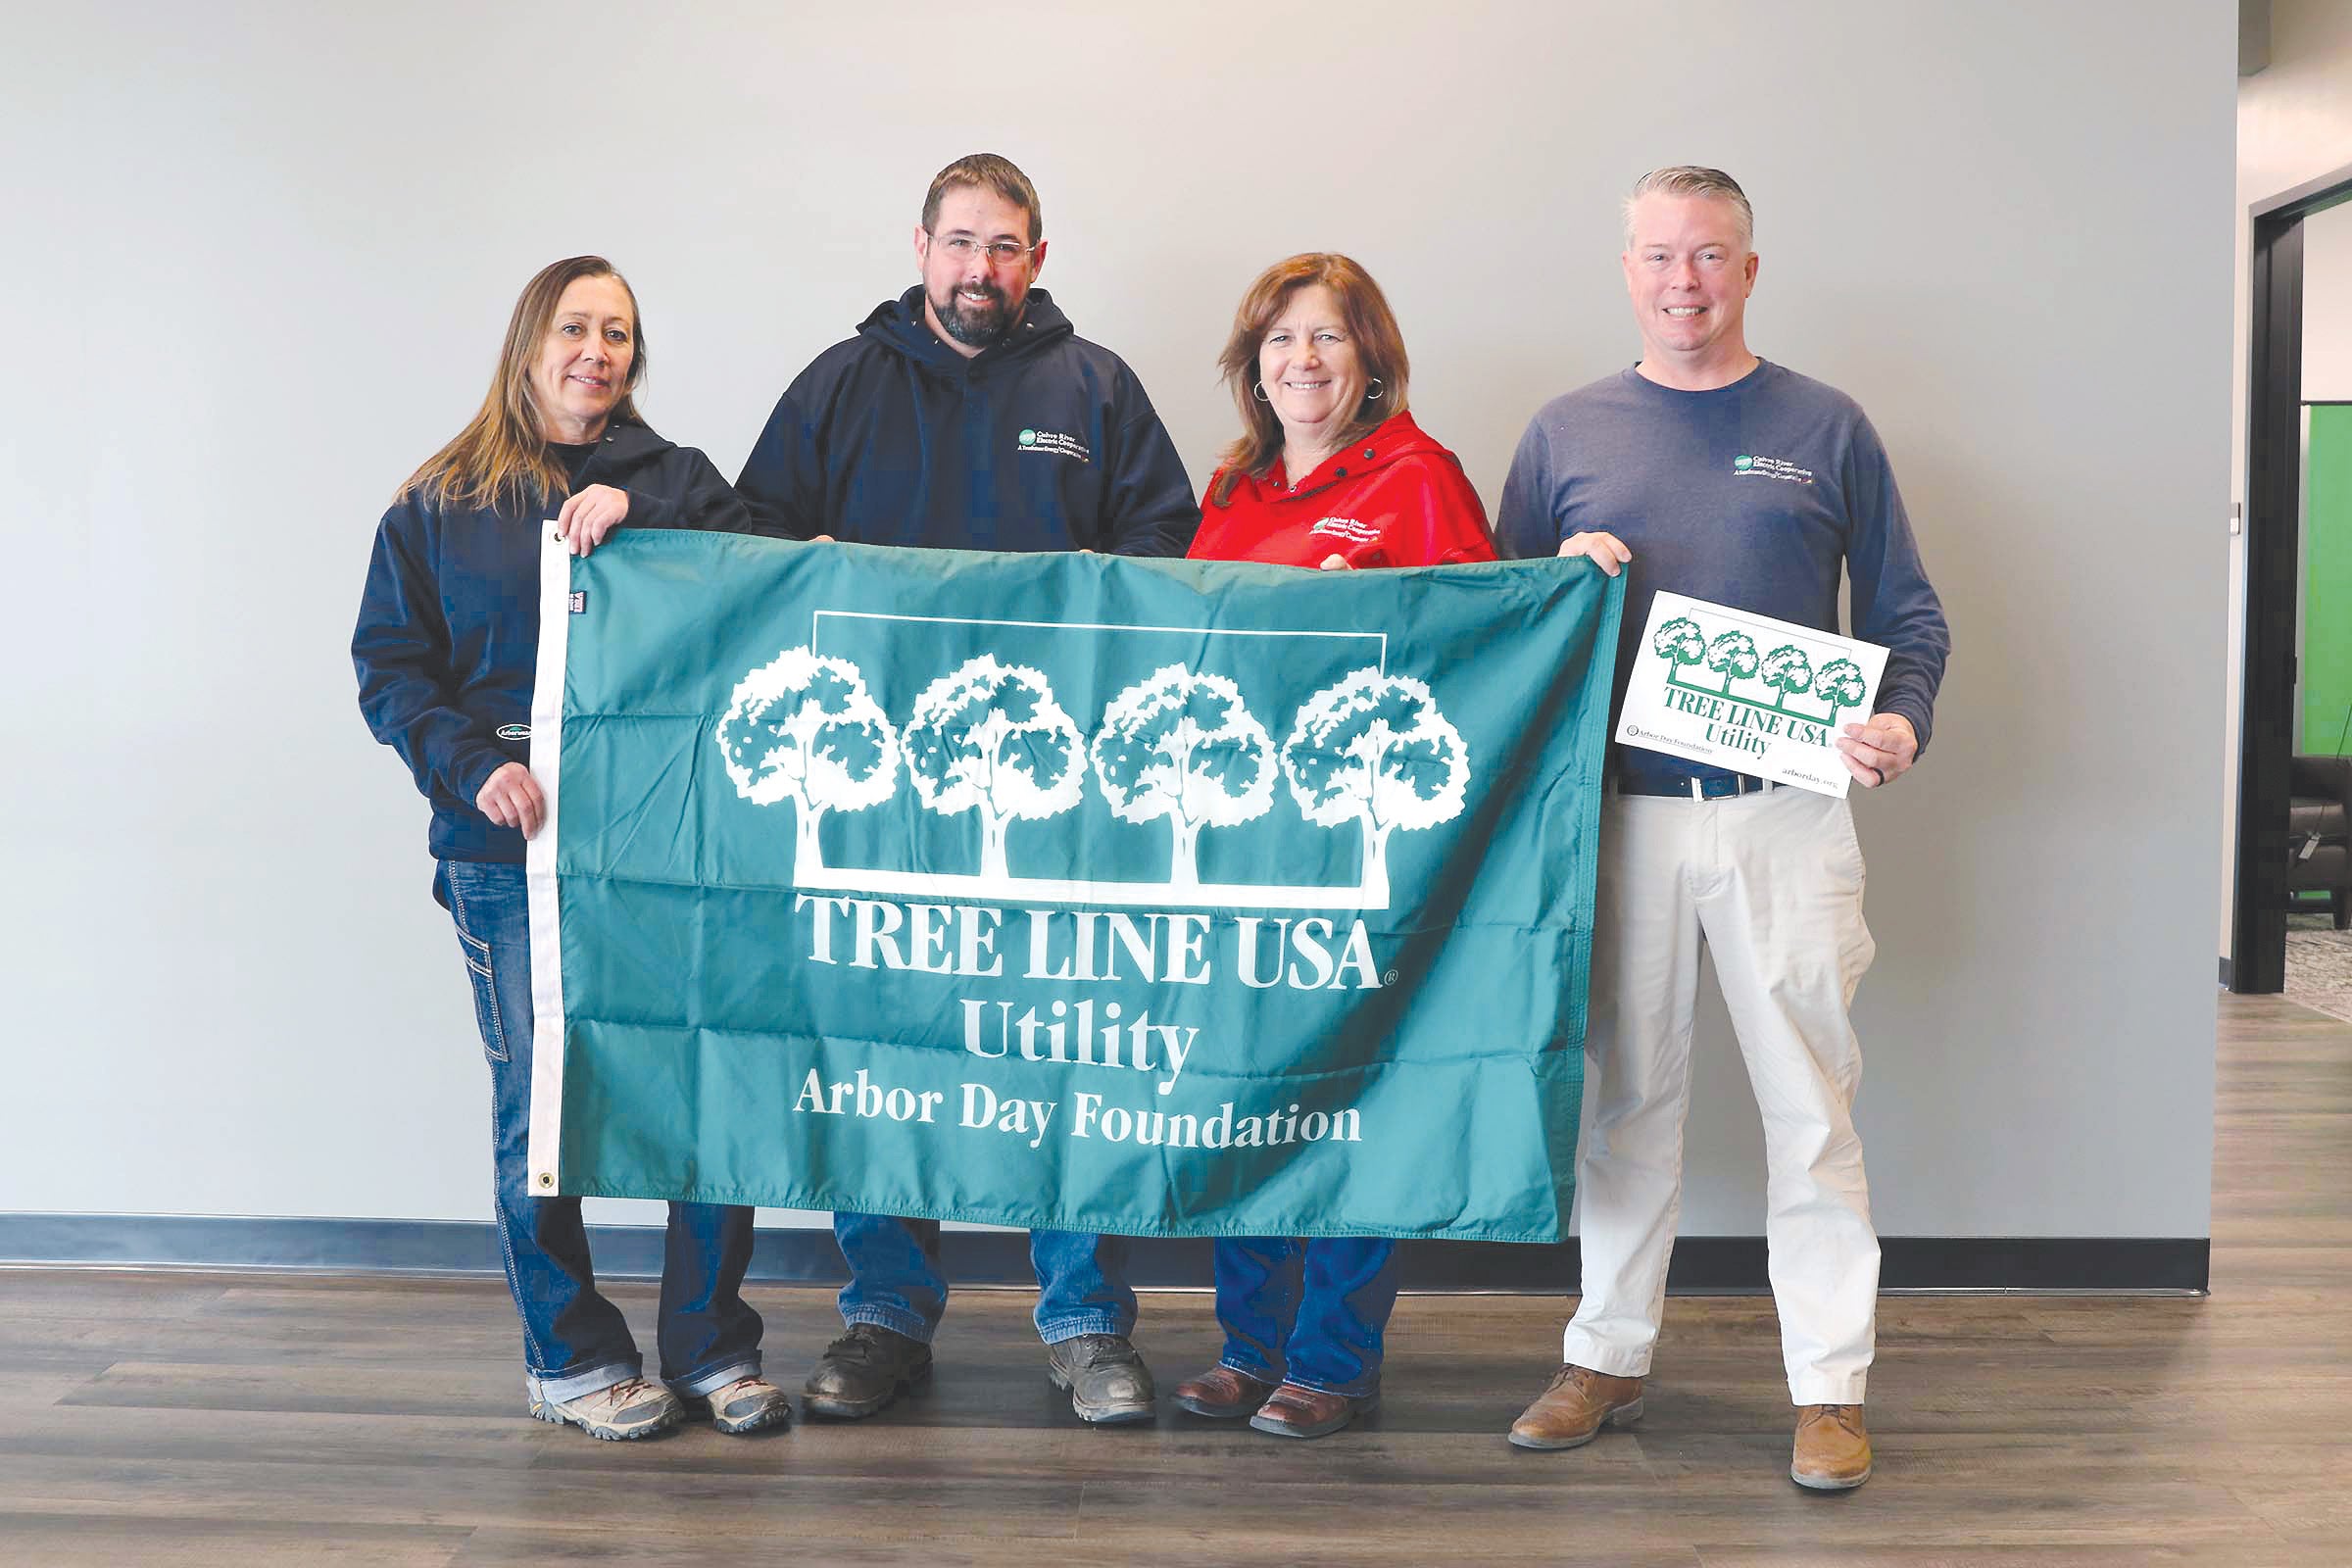 Cuivre River Electric Cooperative's Right-of-Way Department celebrates its 21st year being named a Tree Line USA Utility by the Arbor Day Foundation. Pictured from left are Tina Brocke, Benjamin Voss, Patty Williams, and Scott Skopec.